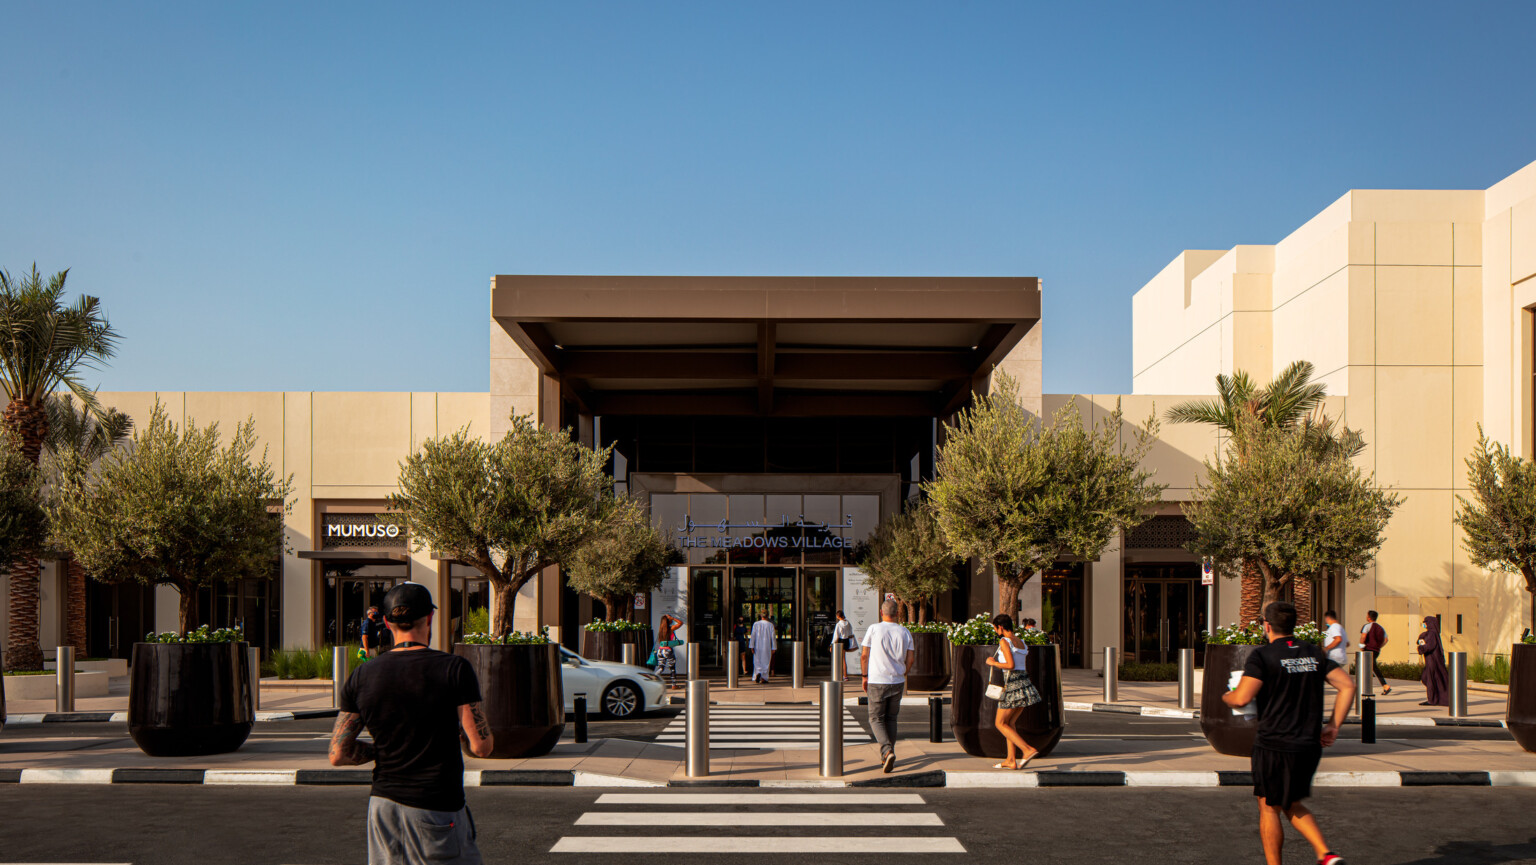 Pedestrians stroll toward a vibrant shopping center showcasing a variety of stores and a lively atmosphere.